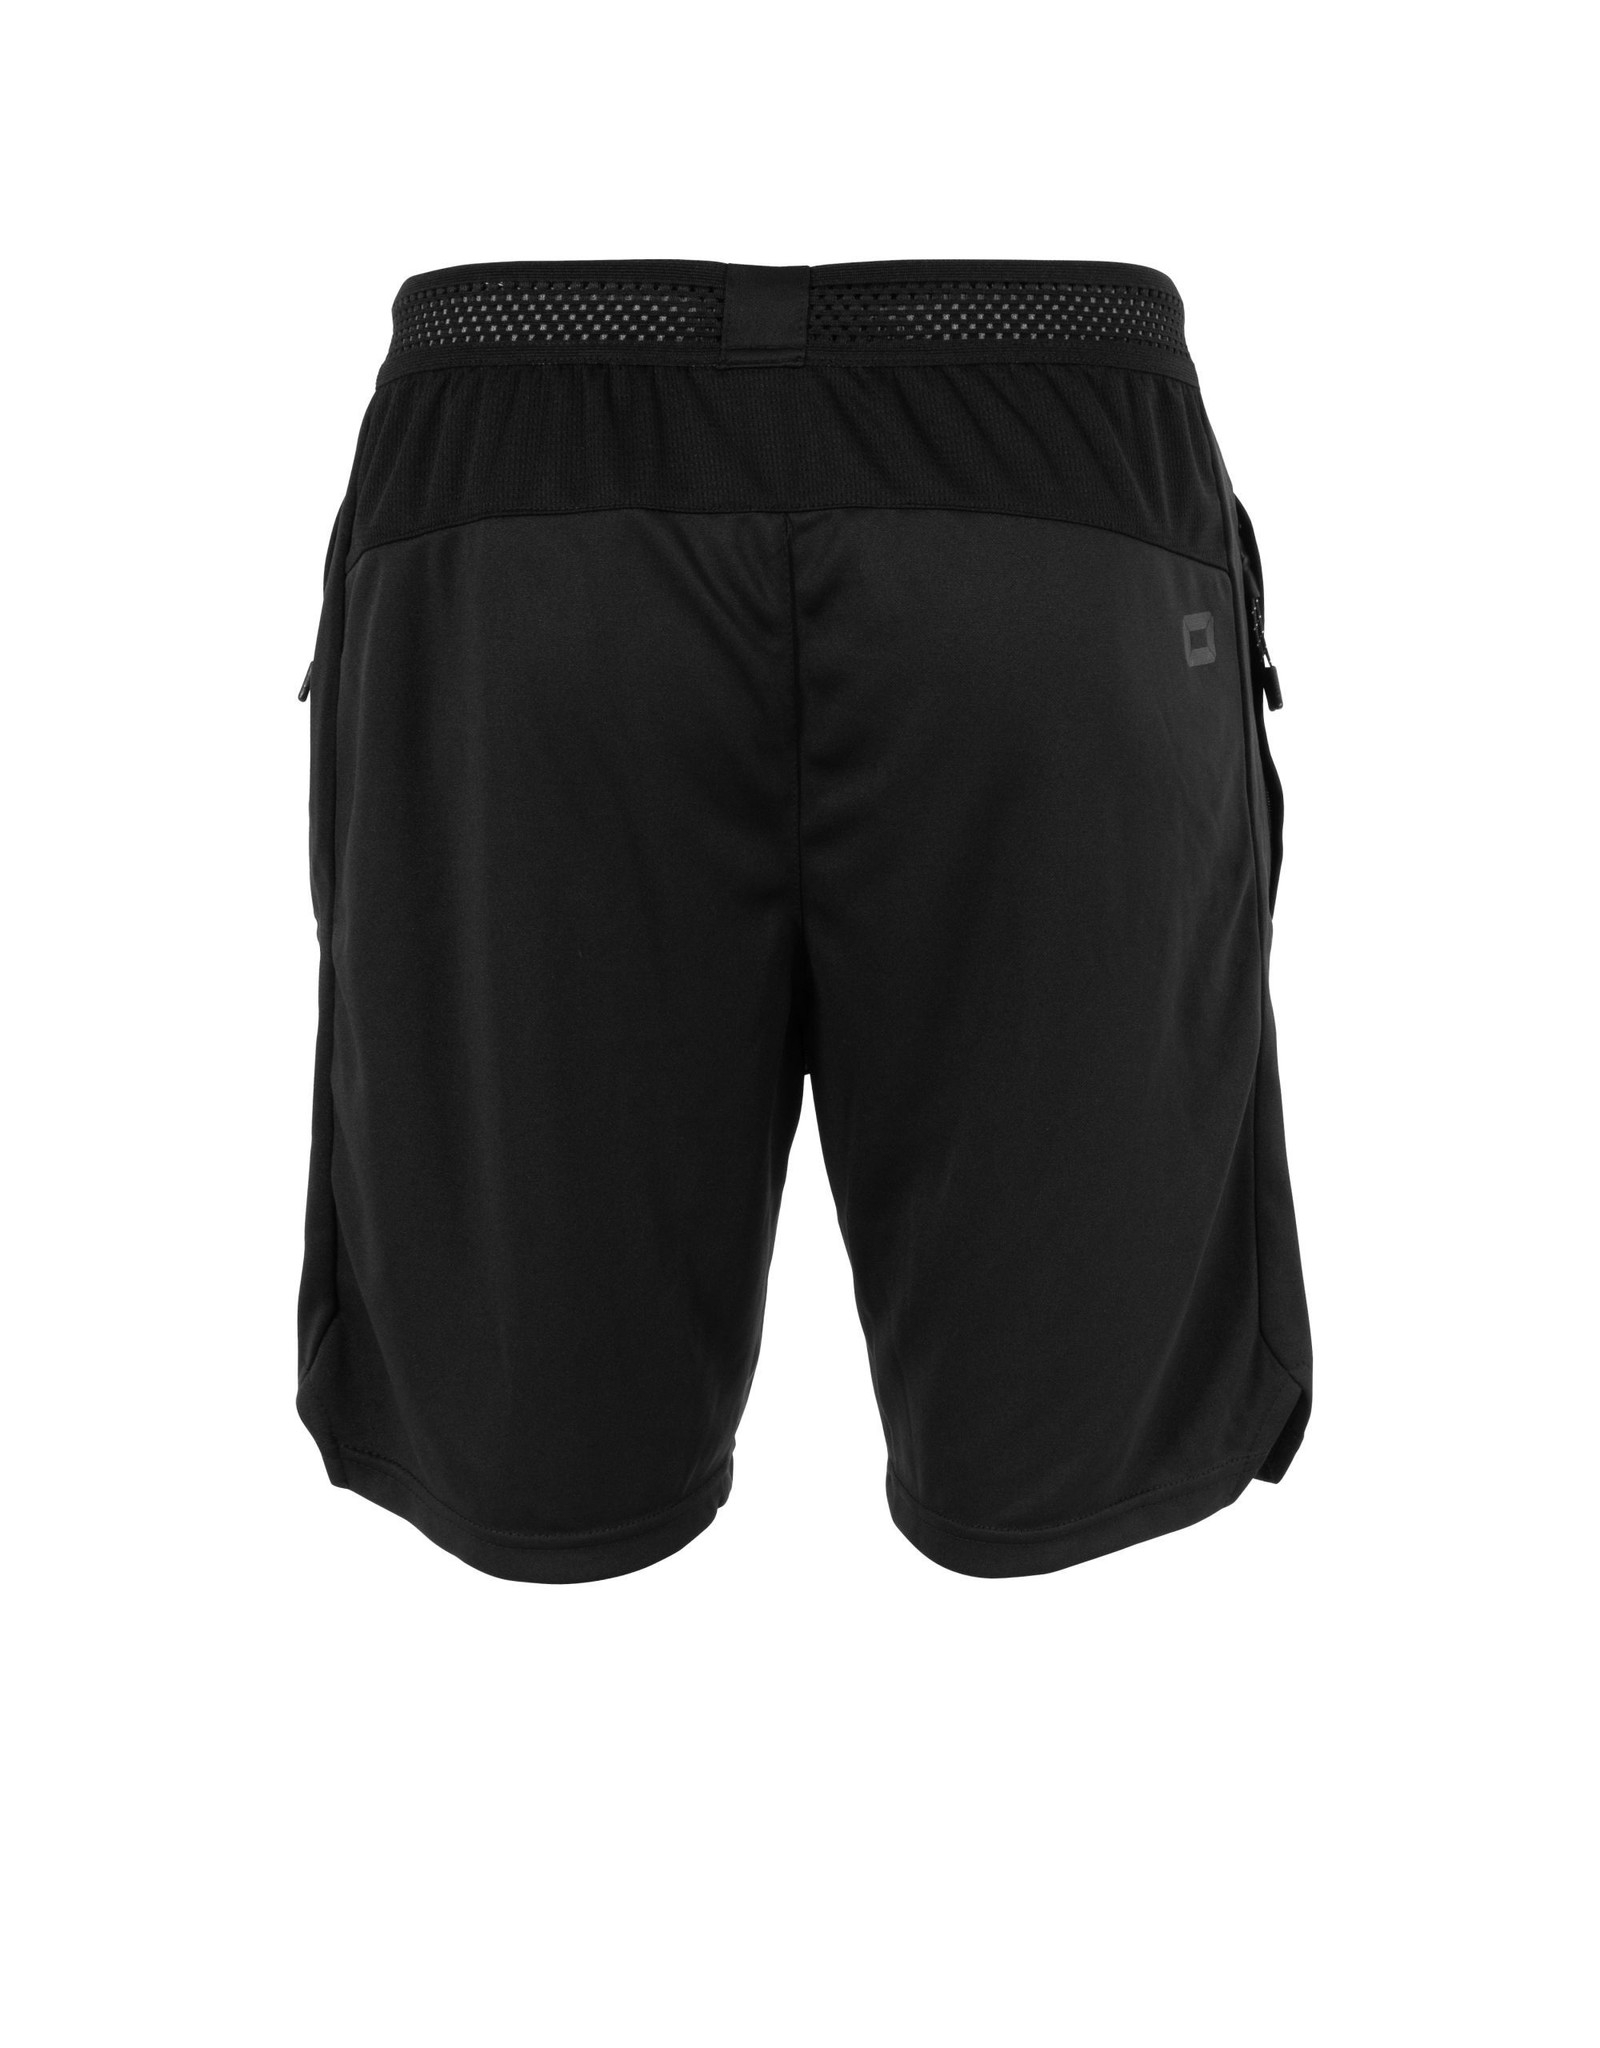 Stanno Functionals Shorts II-Black